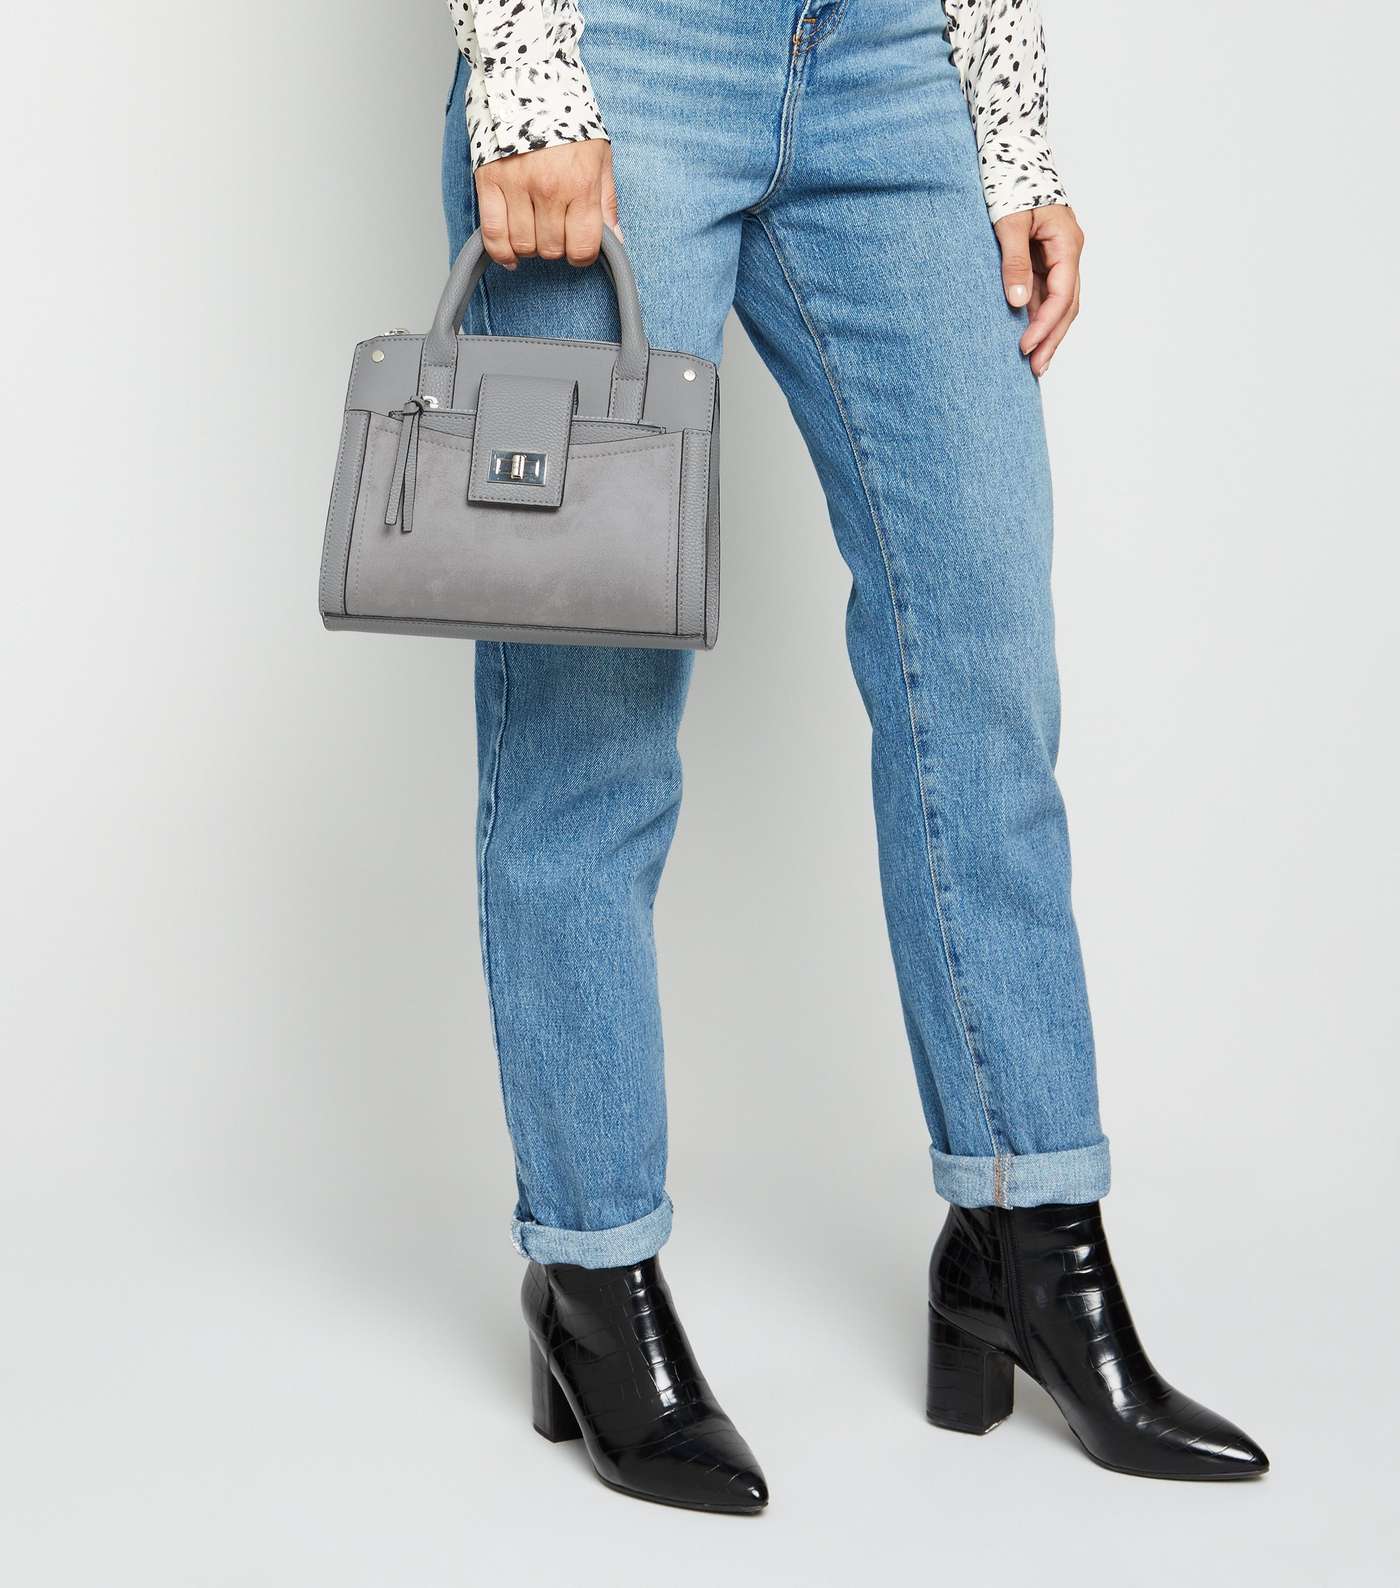 Grey Leather-Look Buckle Strap Tote Bag Image 2